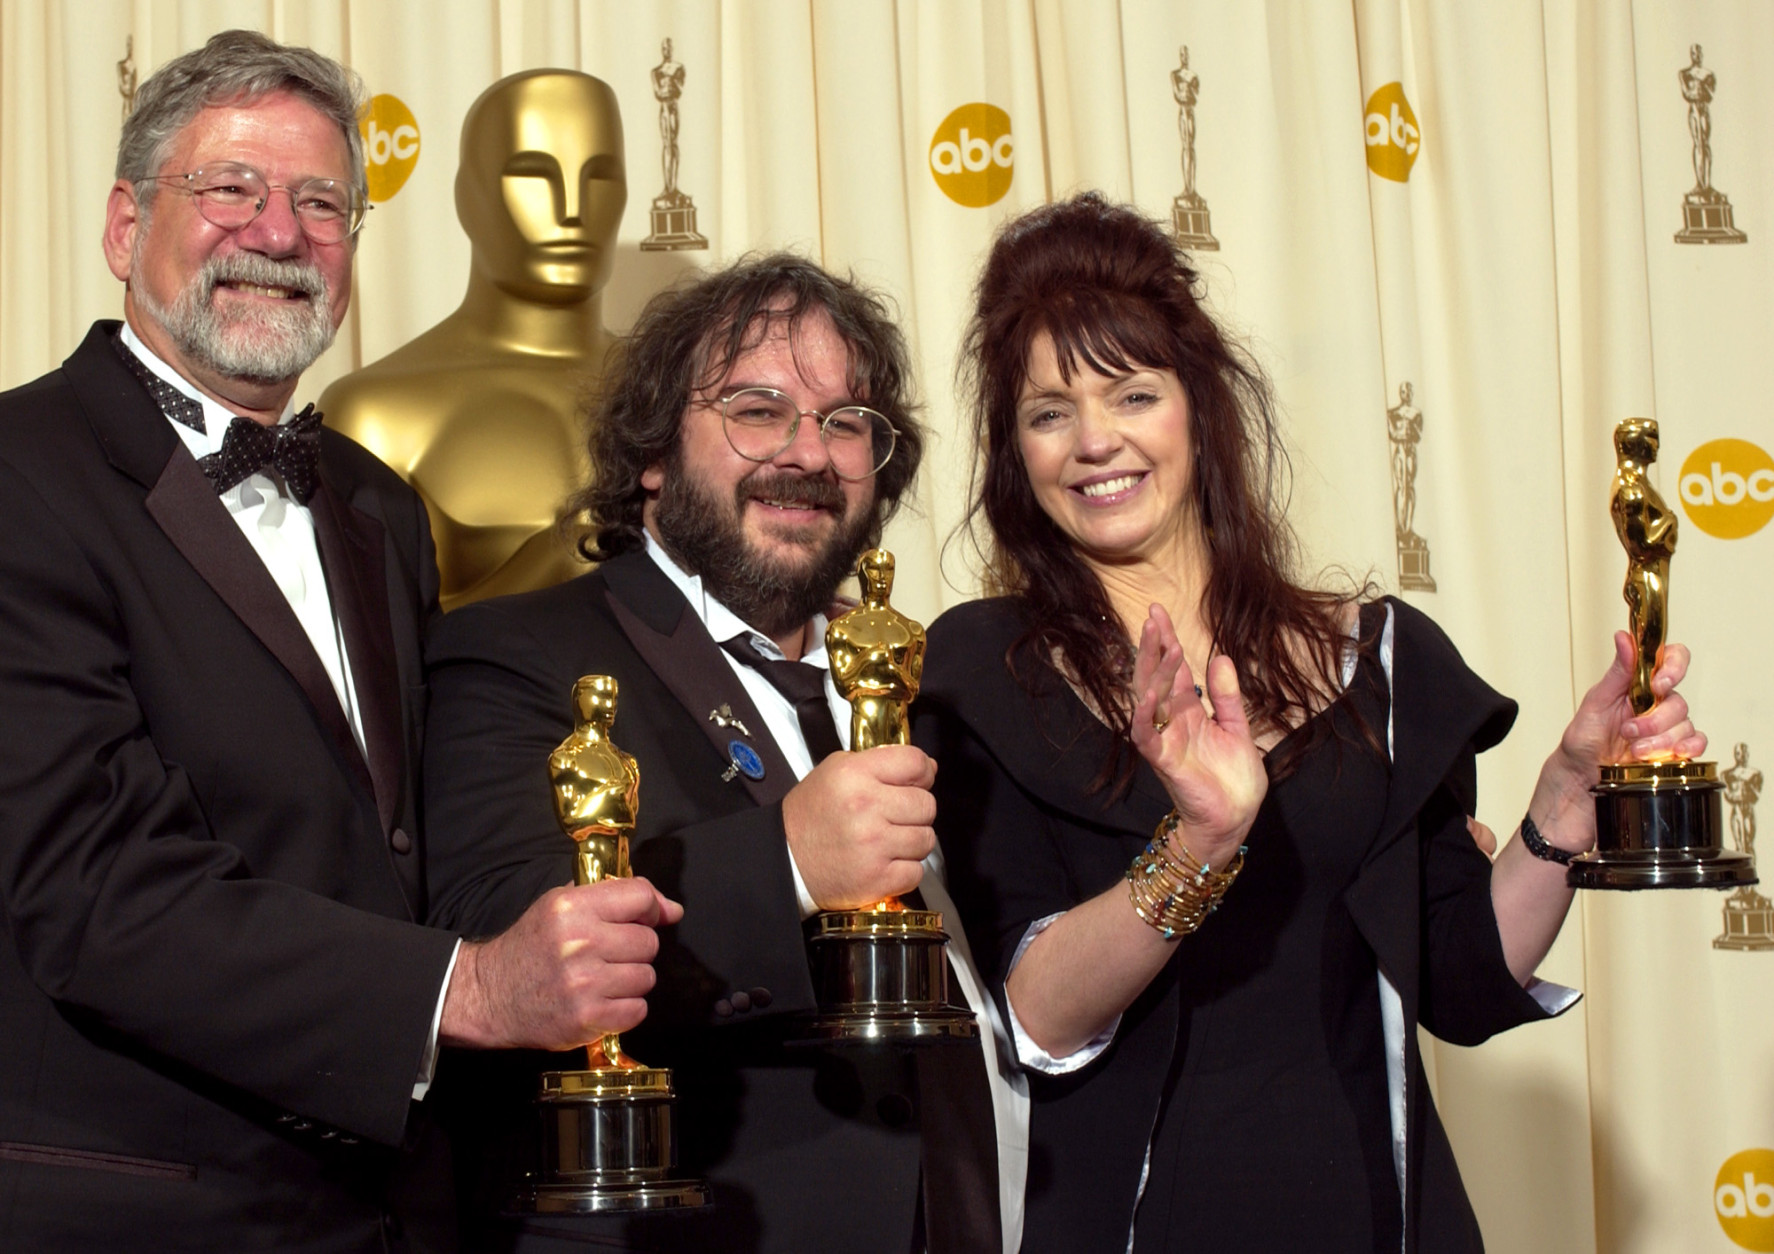 From left, producers Barrie M. Osborne, Peter Jackson and Fran Walsh pose with their Oscars after the film The Lord of the Rings: The Return of the King won for best motion picture of the year at the 76th annual Academy Awards Sunday, Feb. 29, 2004, in Los Angeles. (AP Photo/Reed Saxon)